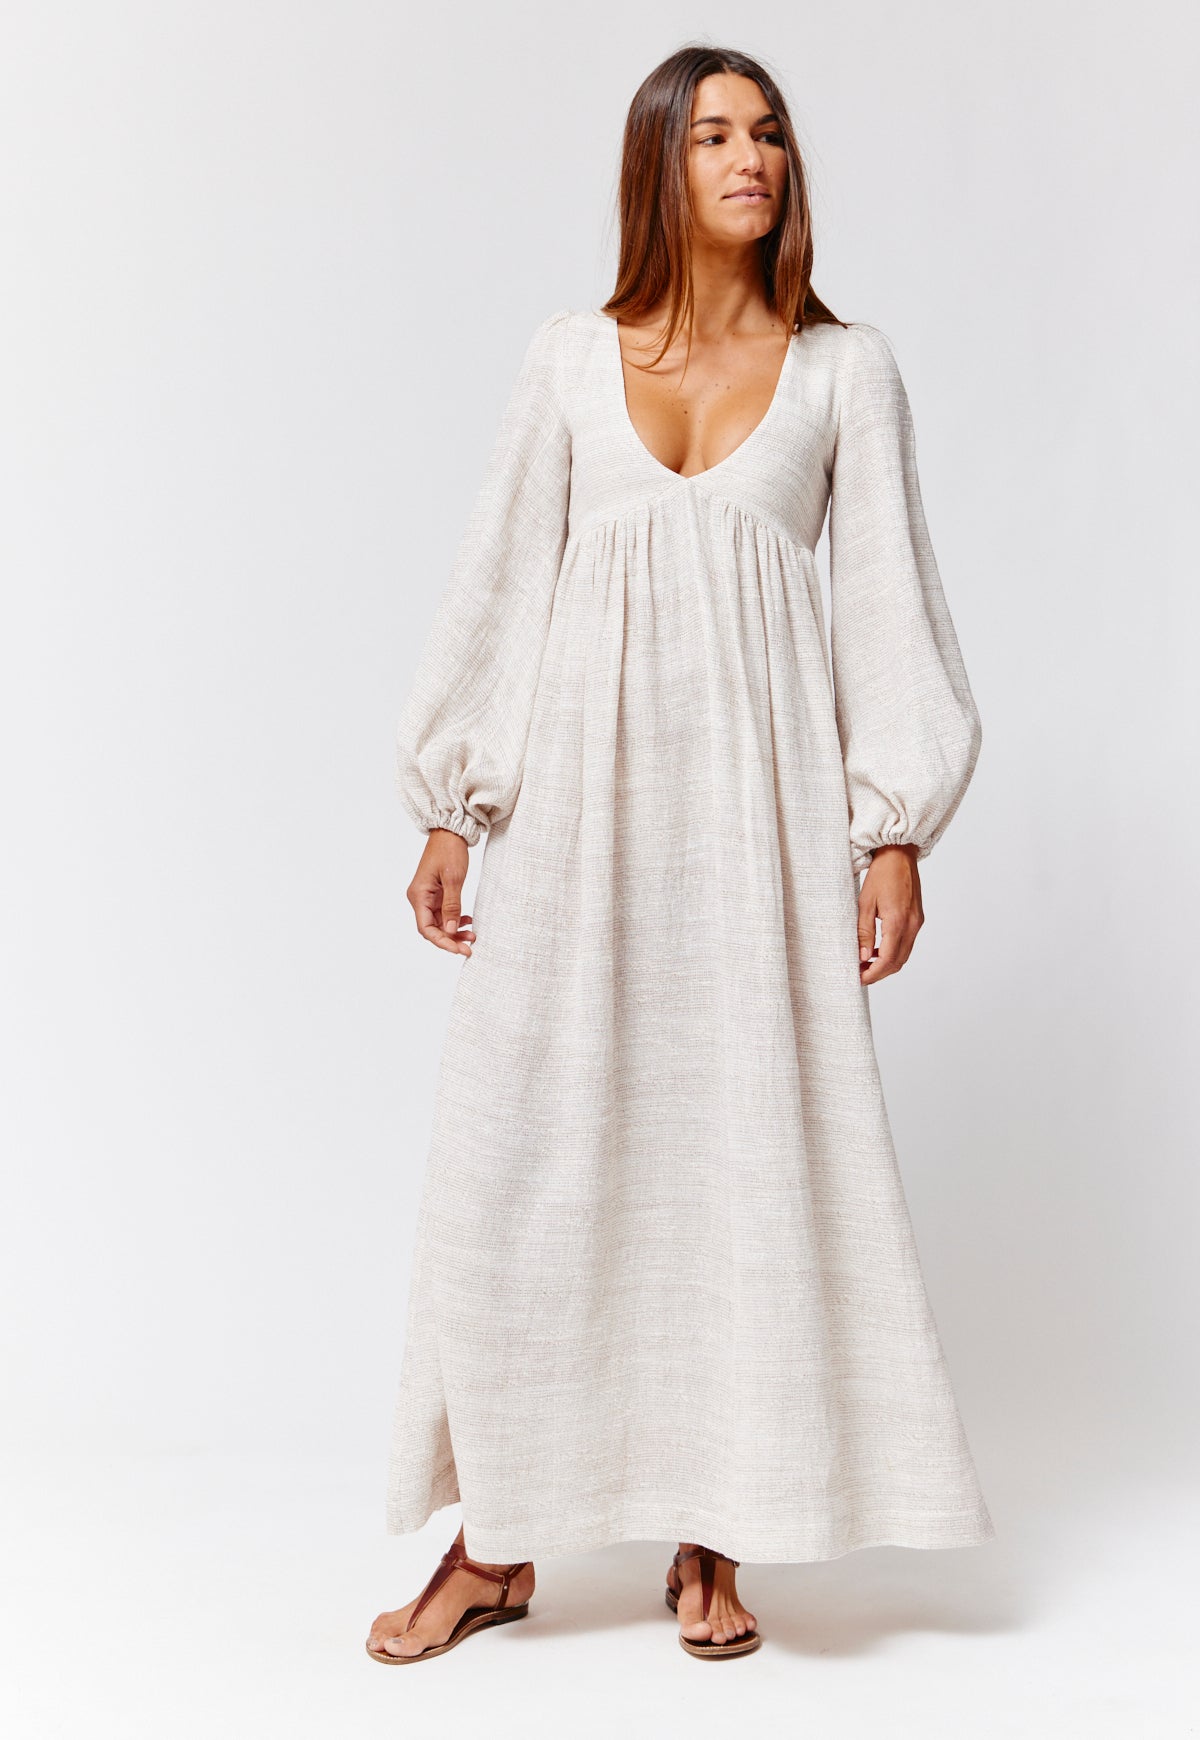 THE CAROLYN DRESS in NATURAL STRIPED GAUZE